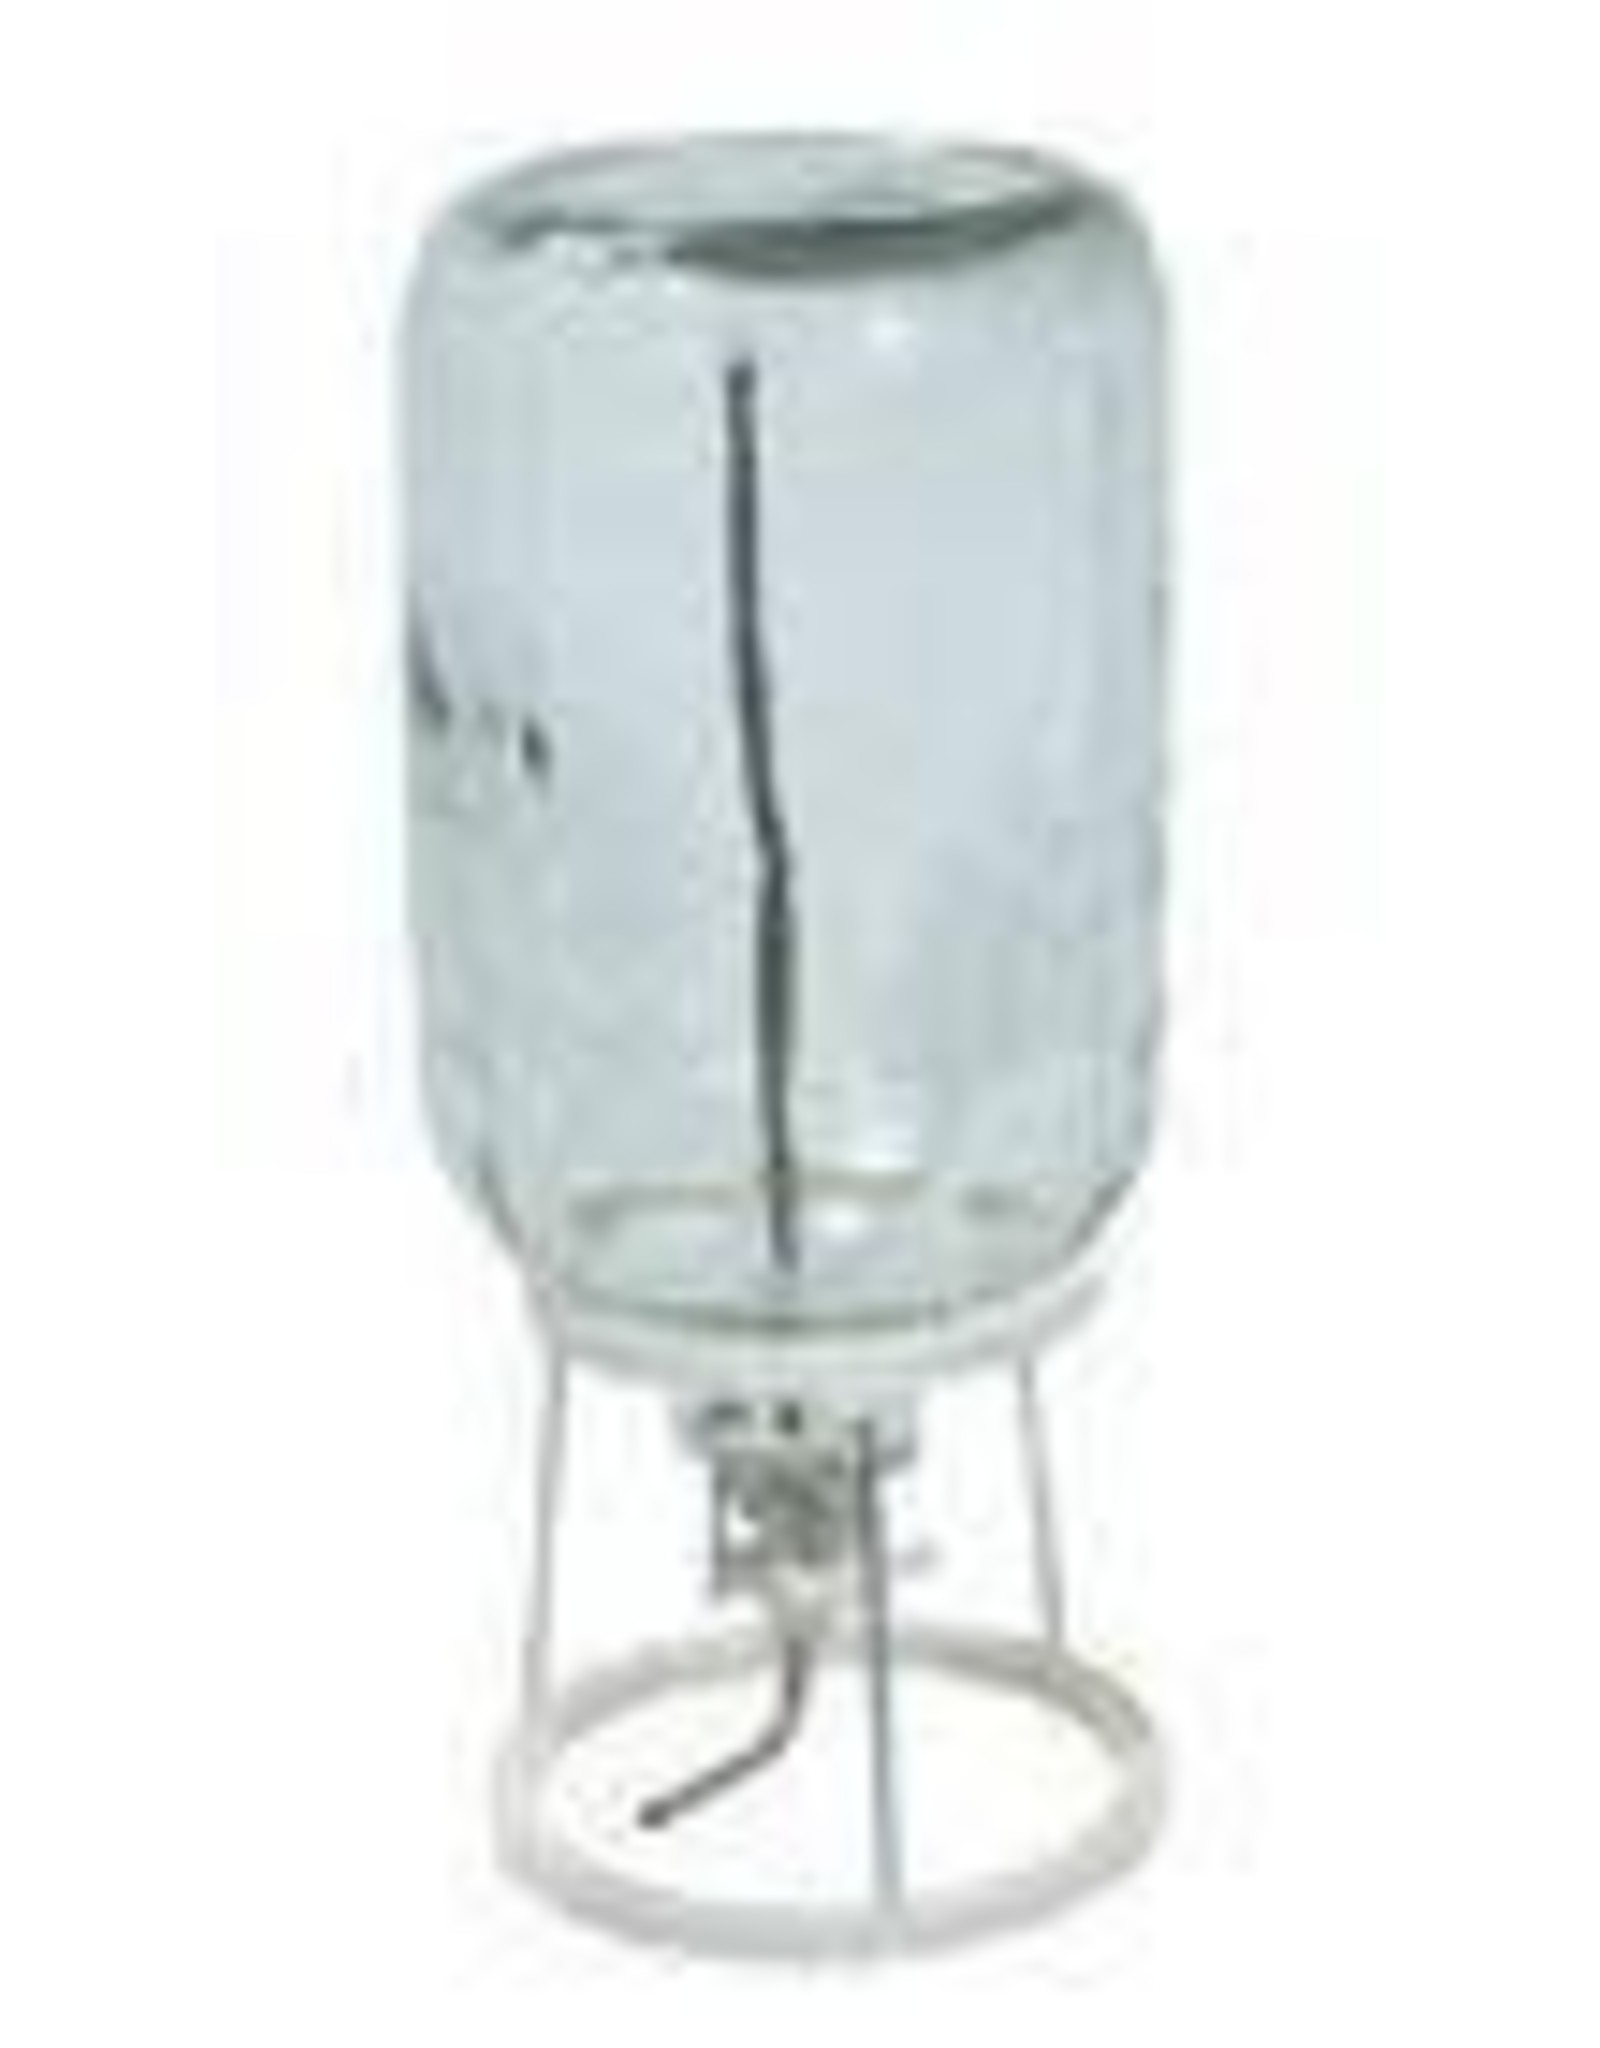 CARBOY DRAINER WASHER STAND